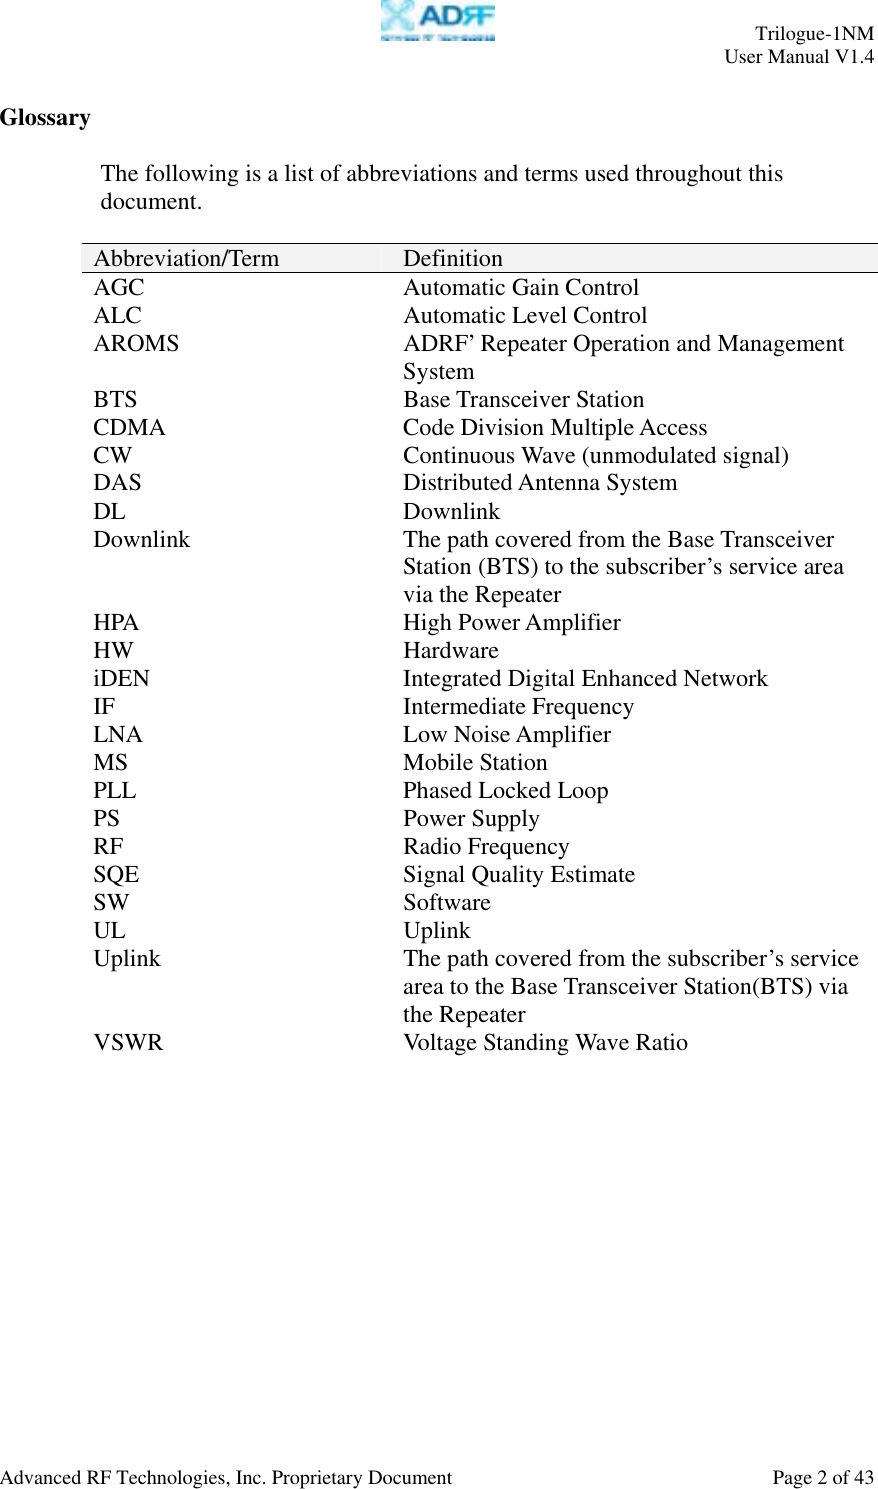     Trilogue-1NM User Manual V1.4  Advanced RF Technologies, Inc. Proprietary Document  Page 2 of 43  Glossary  The following is a list of abbreviations and terms used throughout this document.  Abbreviation/Term  Definition AGC  Automatic Gain Control ALC Automatic Level Control AROMS  ADRF’ Repeater Operation and Management System BTS Base Transceiver Station CDMA Code Division Multiple Access CW Continuous Wave (unmodulated signal) DAS Distributed Antenna System DL Downlink Downlink  The path covered from the Base Transceiver Station (BTS) to the subscriber’s service area via the Repeater HPA High Power Amplifier HW Hardware iDEN  Integrated Digital Enhanced Network IF Intermediate Frequency LNA Low Noise Amplifier MS Mobile Station  PLL Phased Locked Loop PS Power Supply RF Radio Frequency SQE  Signal Quality Estimate SW Software UL Uplink Uplink  The path covered from the subscriber’s service area to the Base Transceiver Station(BTS) via the Repeater  VSWR  Voltage Standing Wave Ratio   